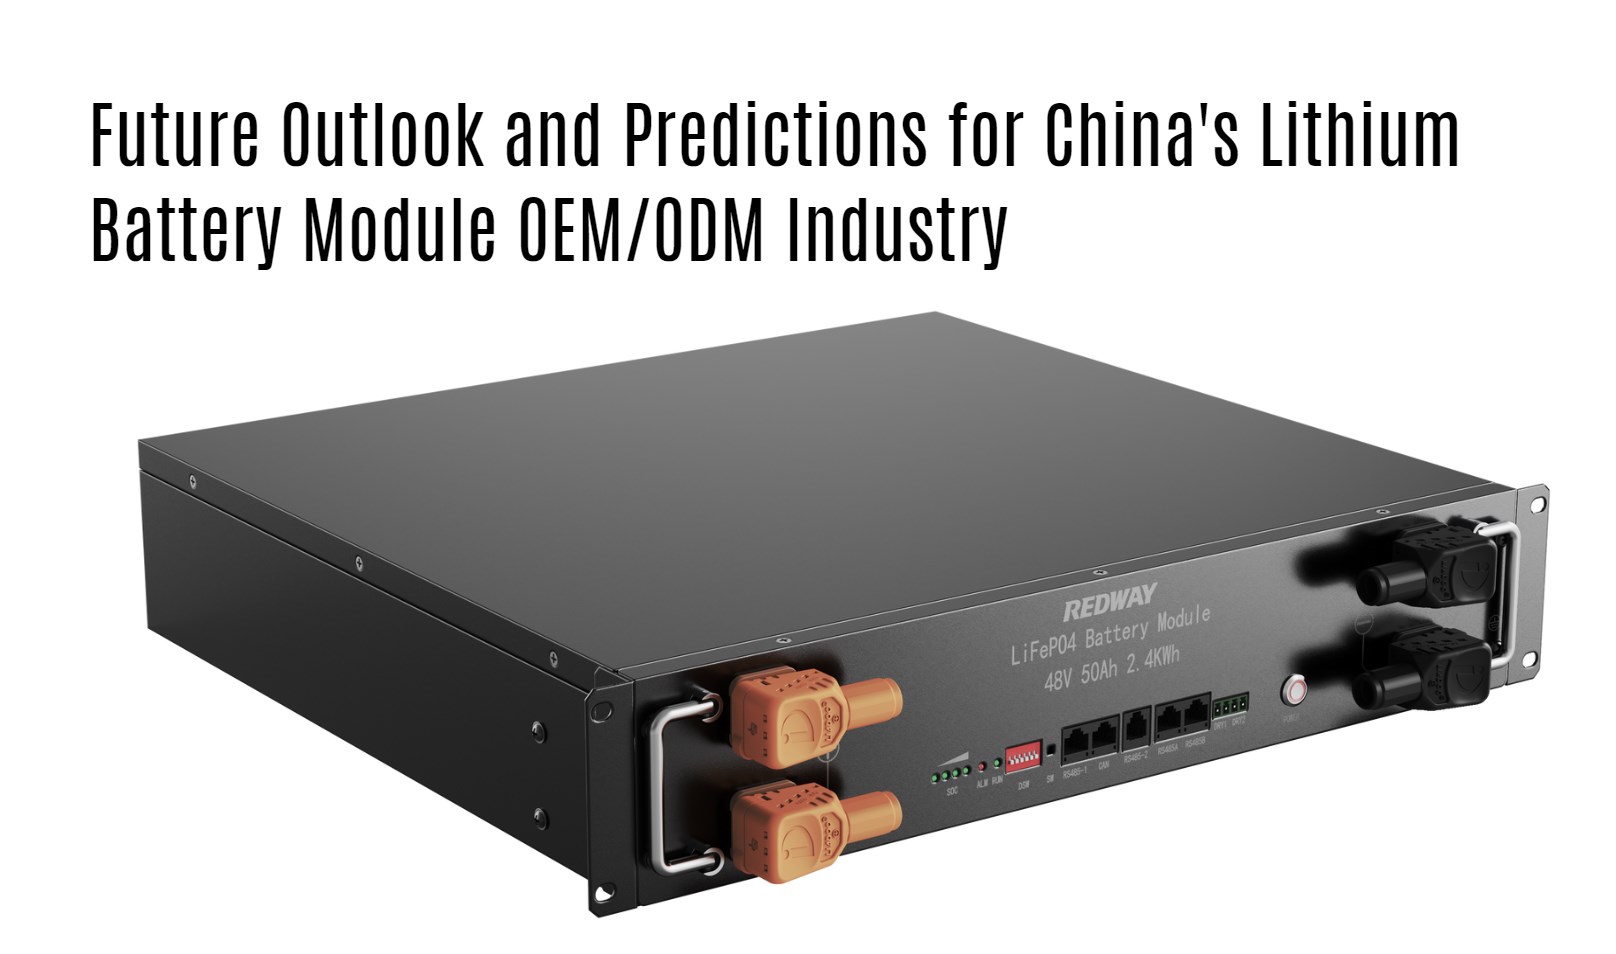 Future Outlook and Predictions for China's Lithium Battery Module OEM/ODM Industry